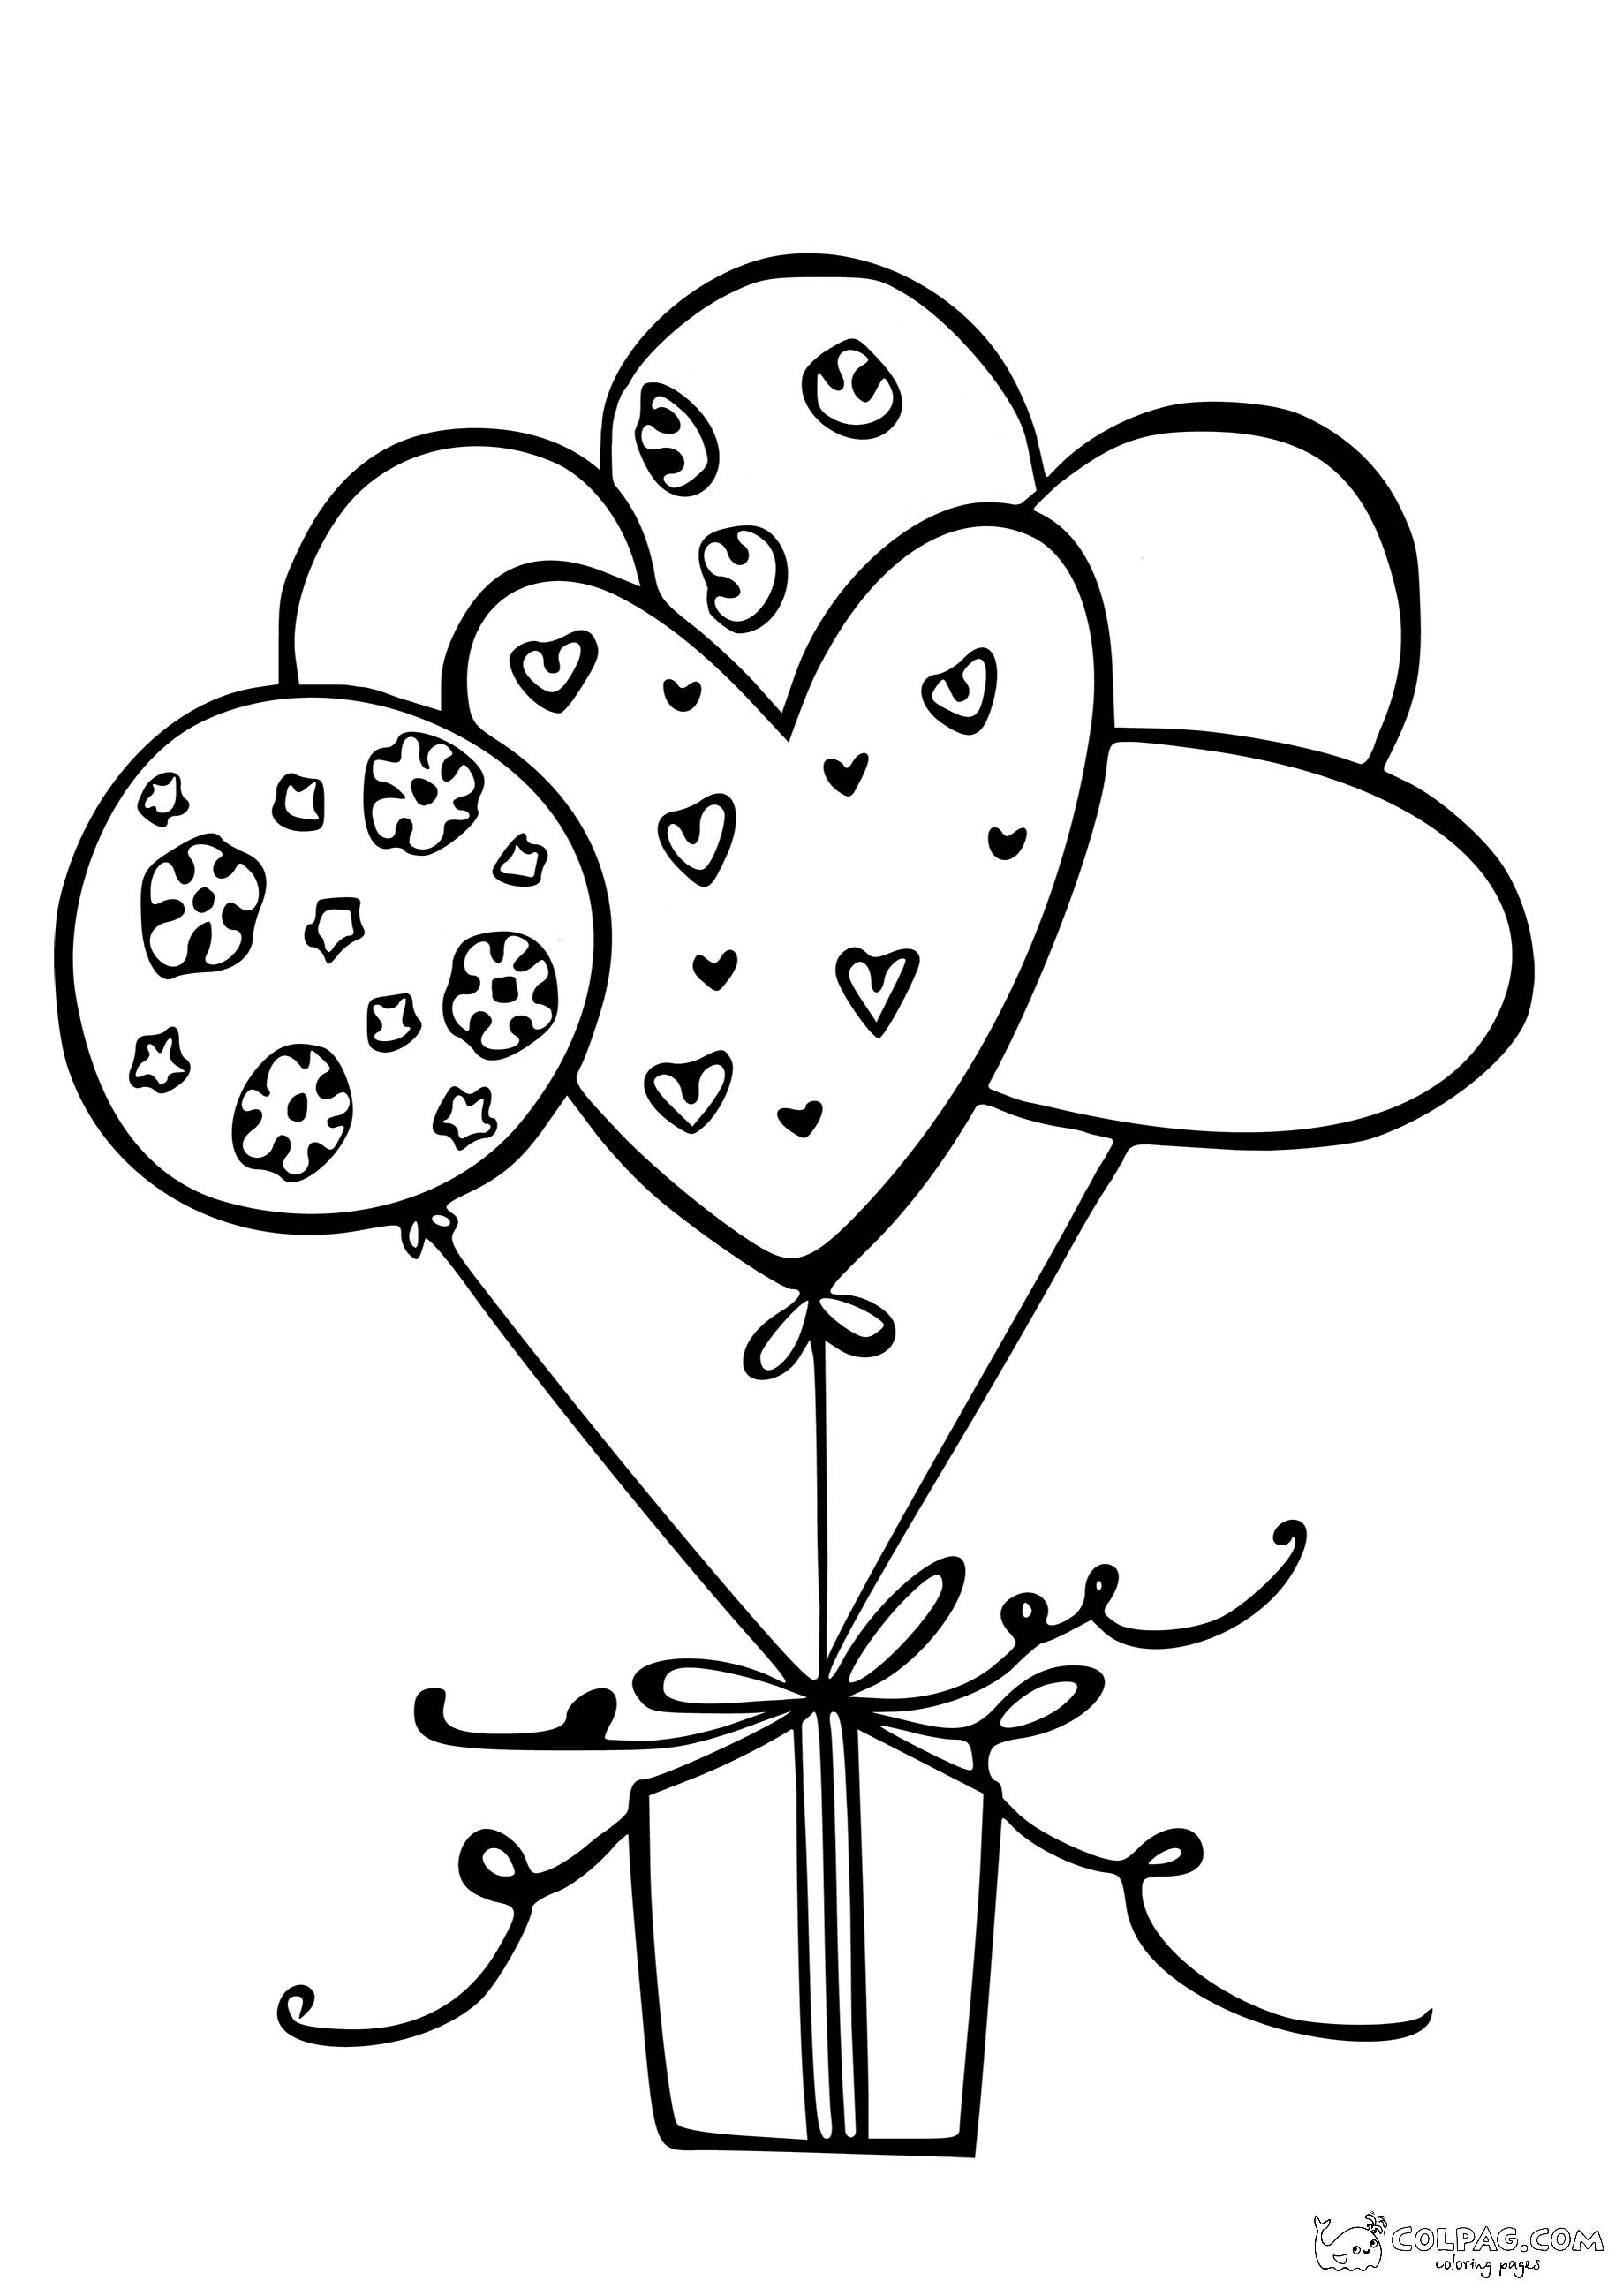 7-present-box-and-baloons-coloring-page-colpag-7